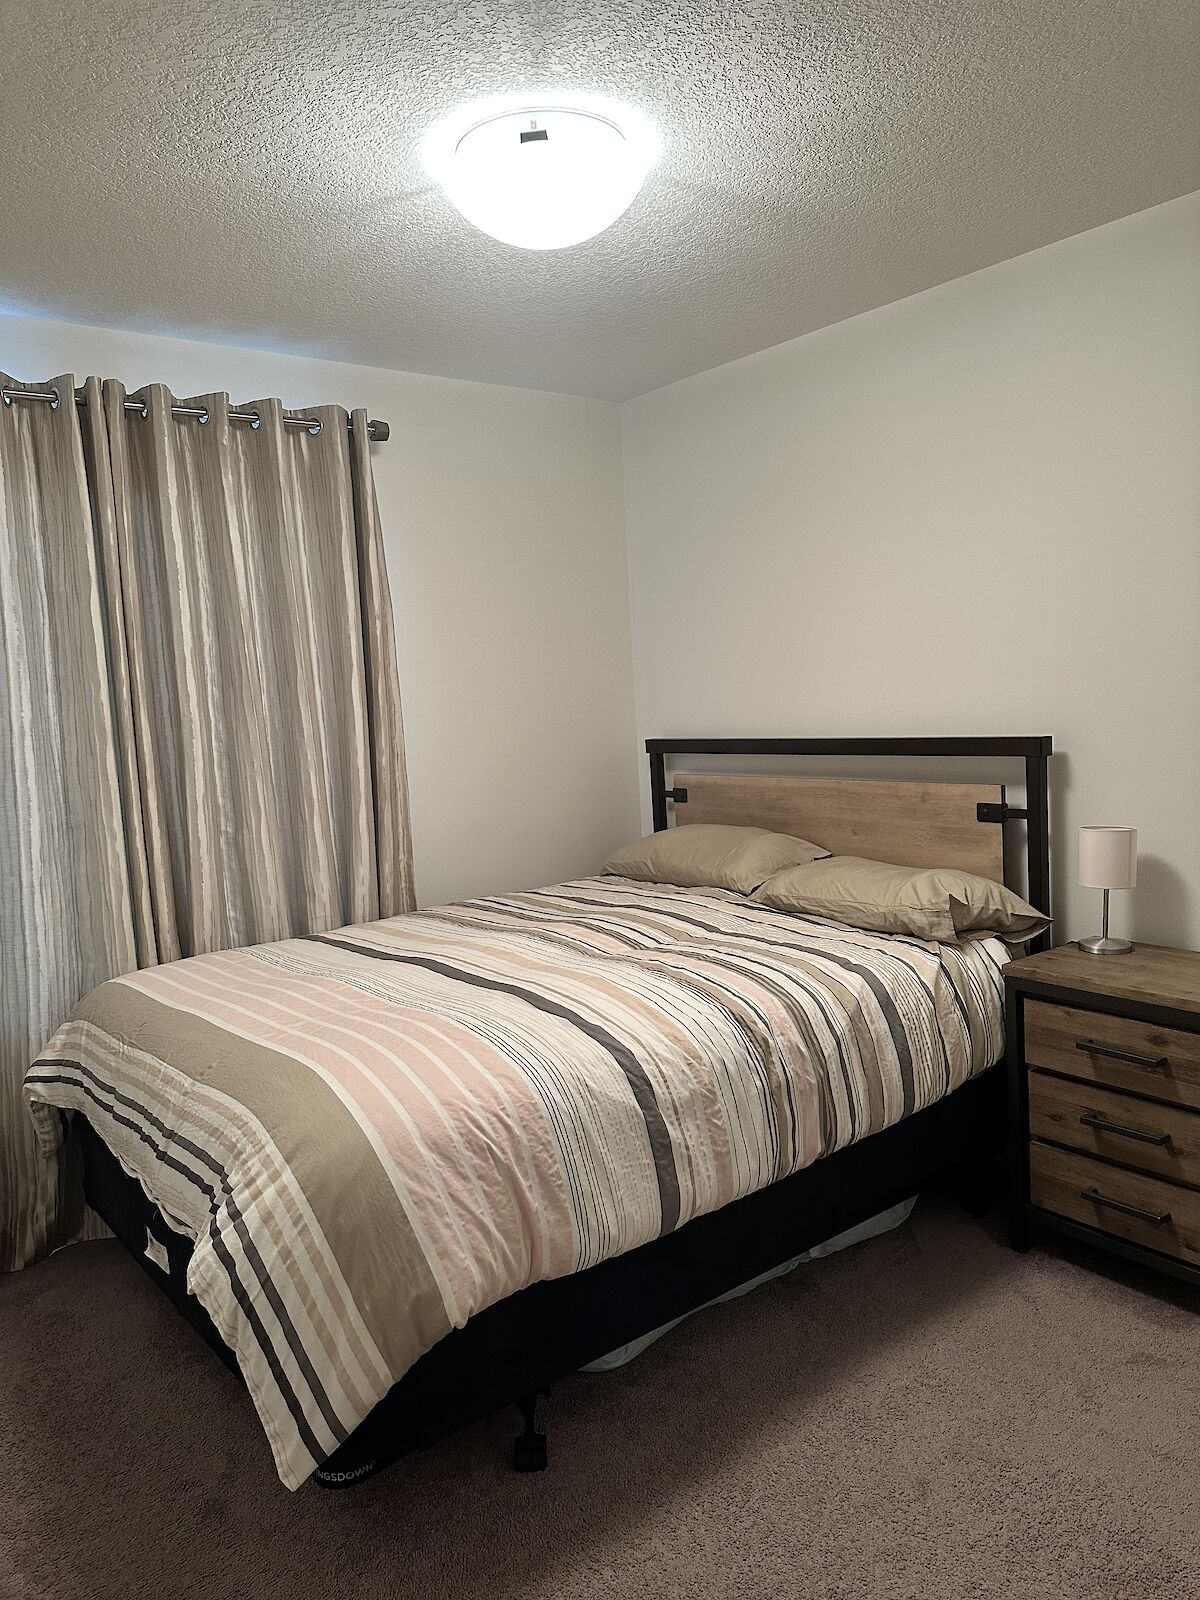 Cochrane Room For Rent For Rent | Room in a house